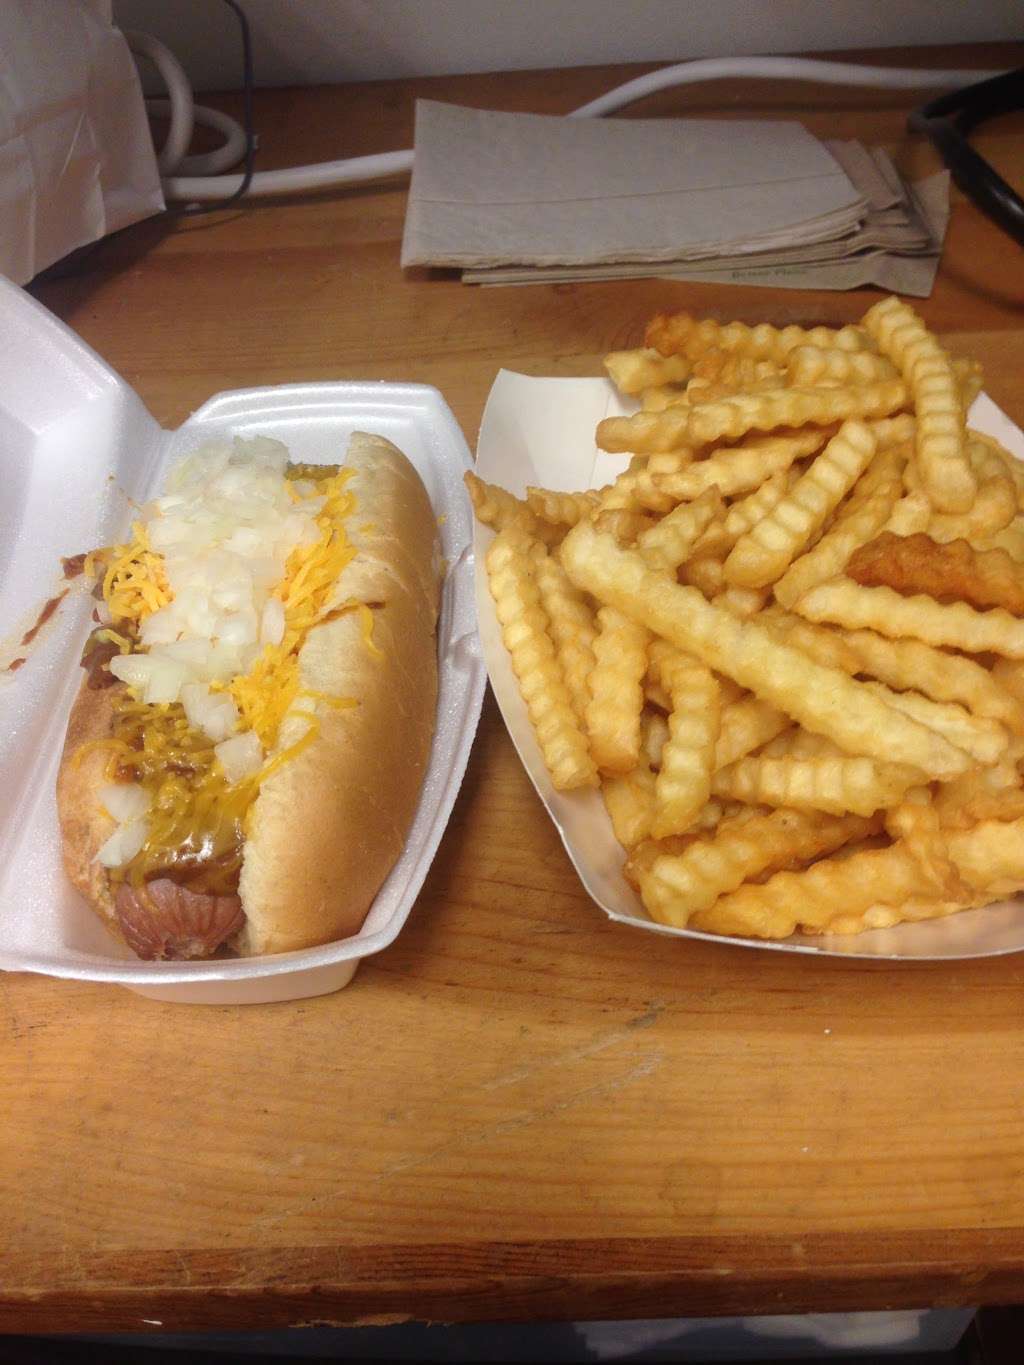 DJs Hot Dog Company | 7035 E 96th St, Indianapolis, IN 46250 | Phone: (317) 842-8442